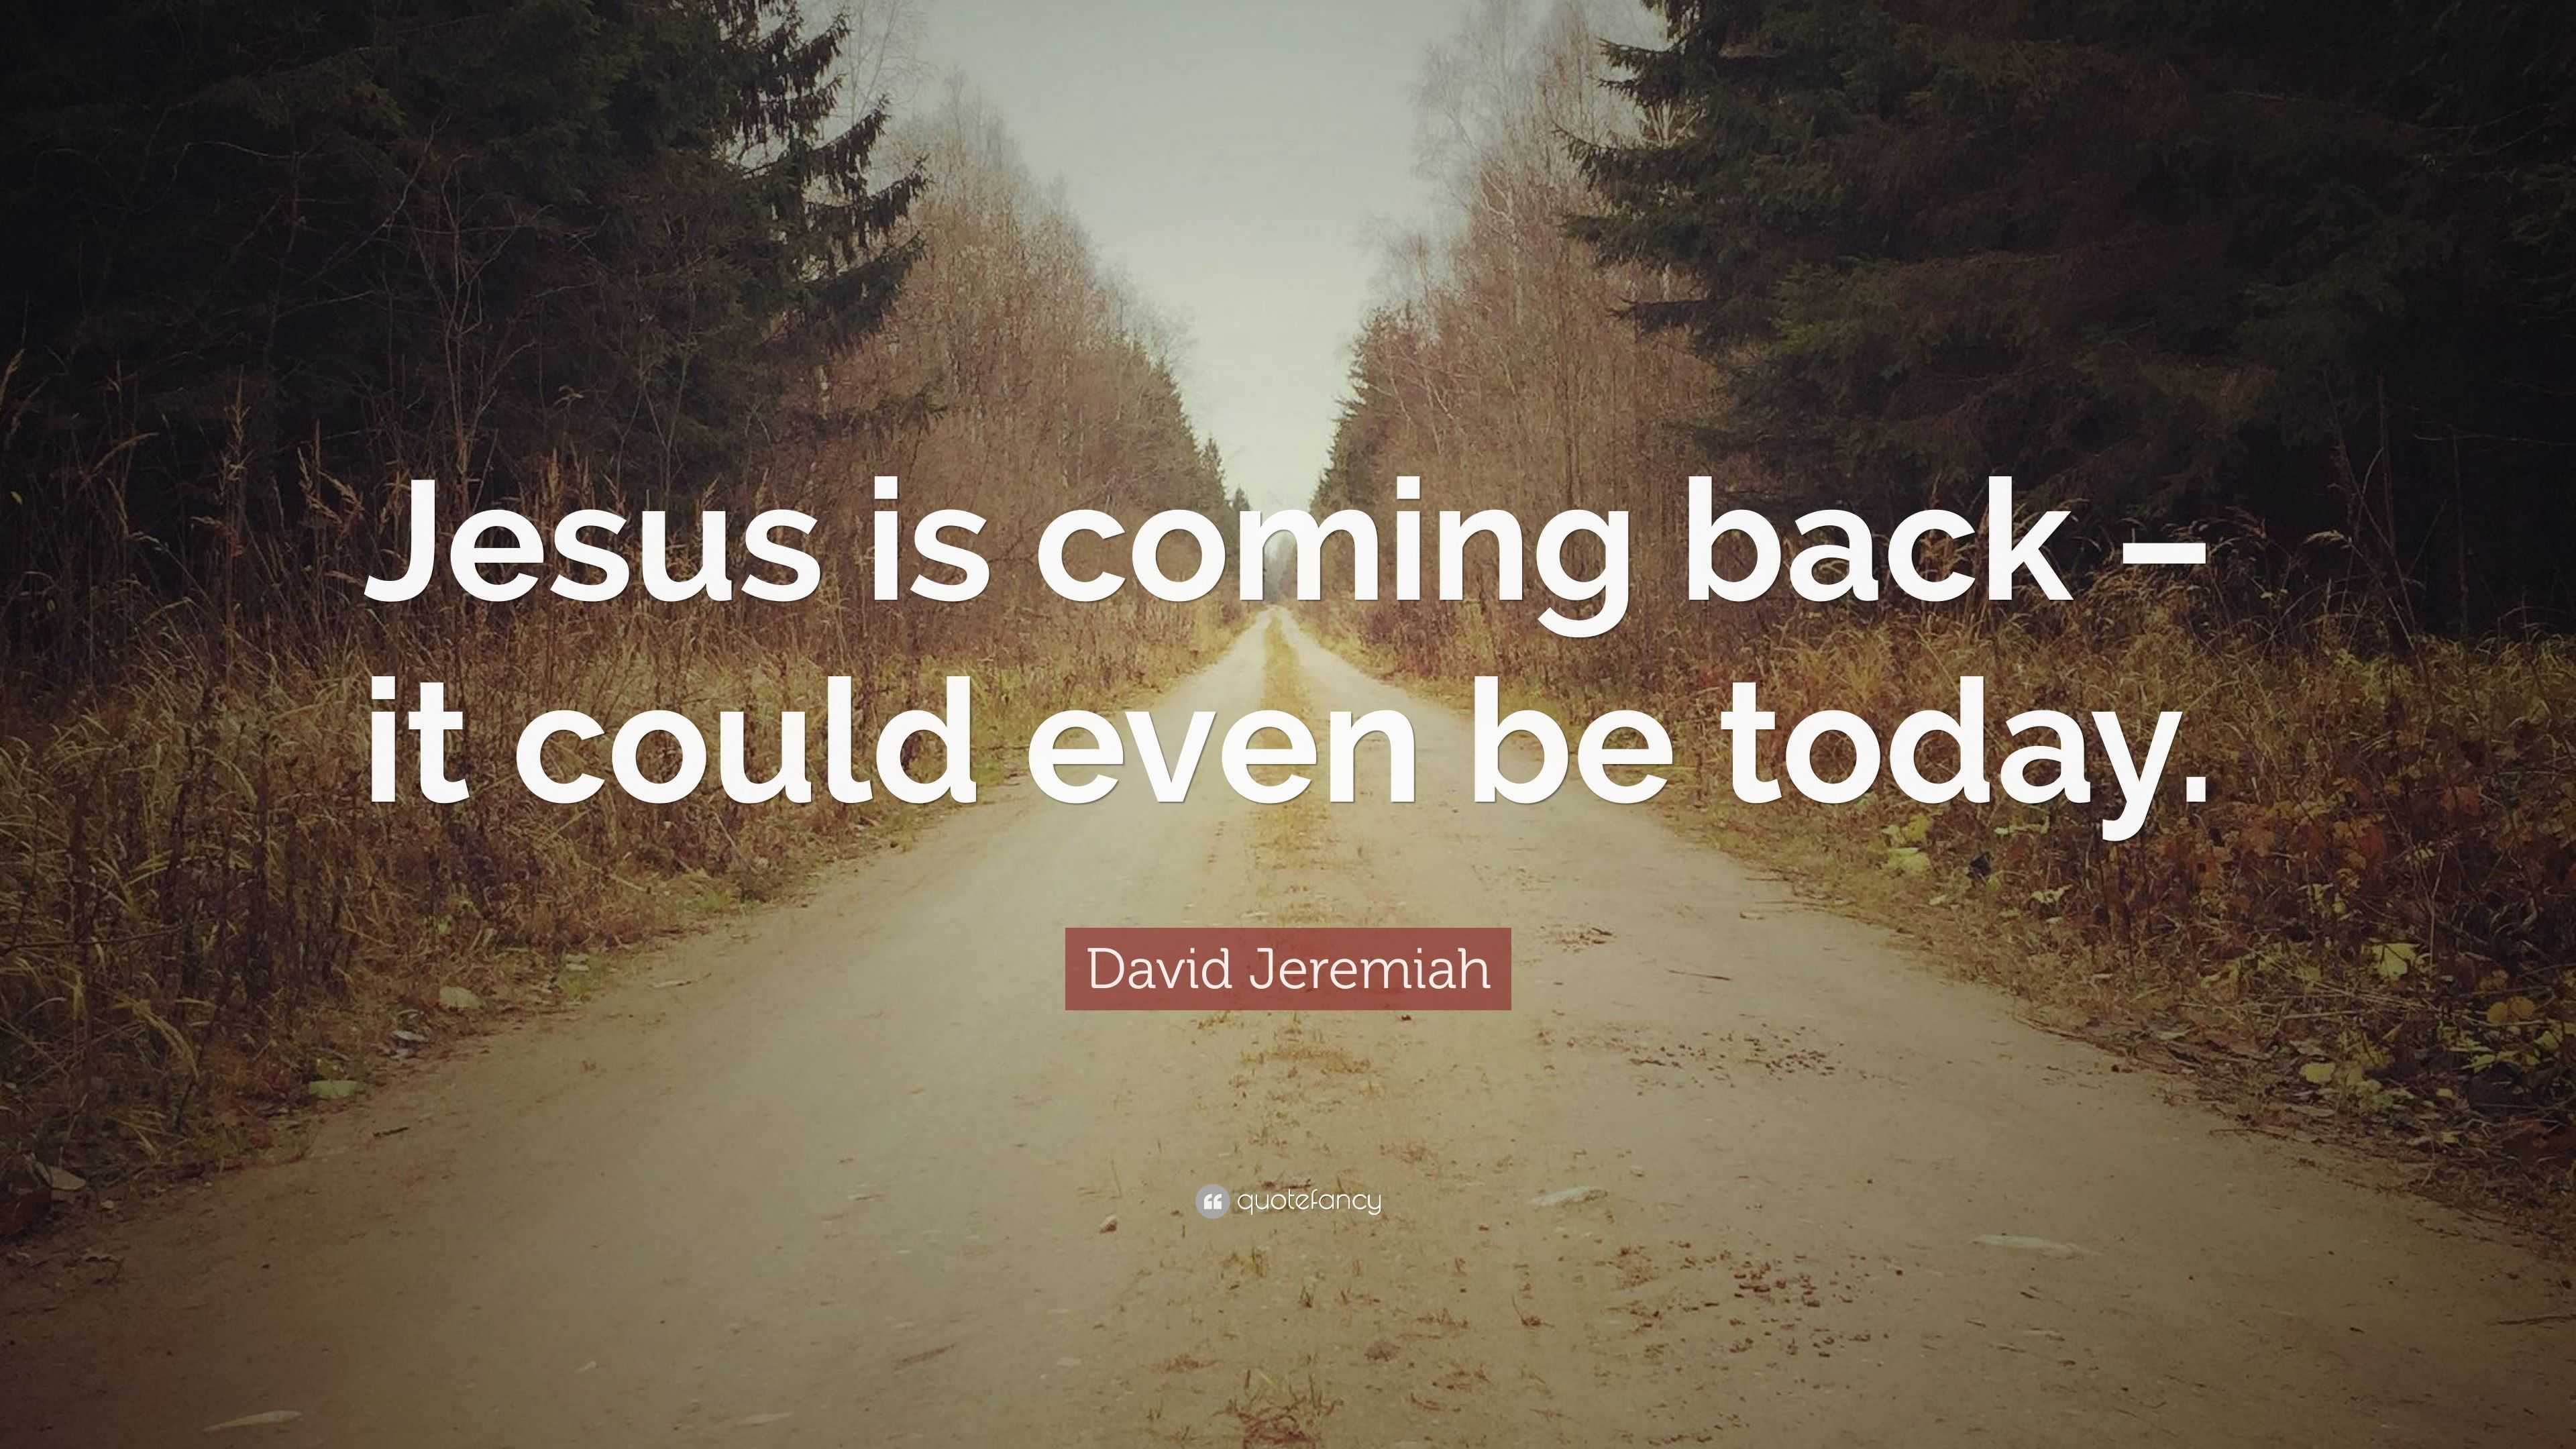 David Jeremiah Quote “Jesus is coming back it could even be today.”